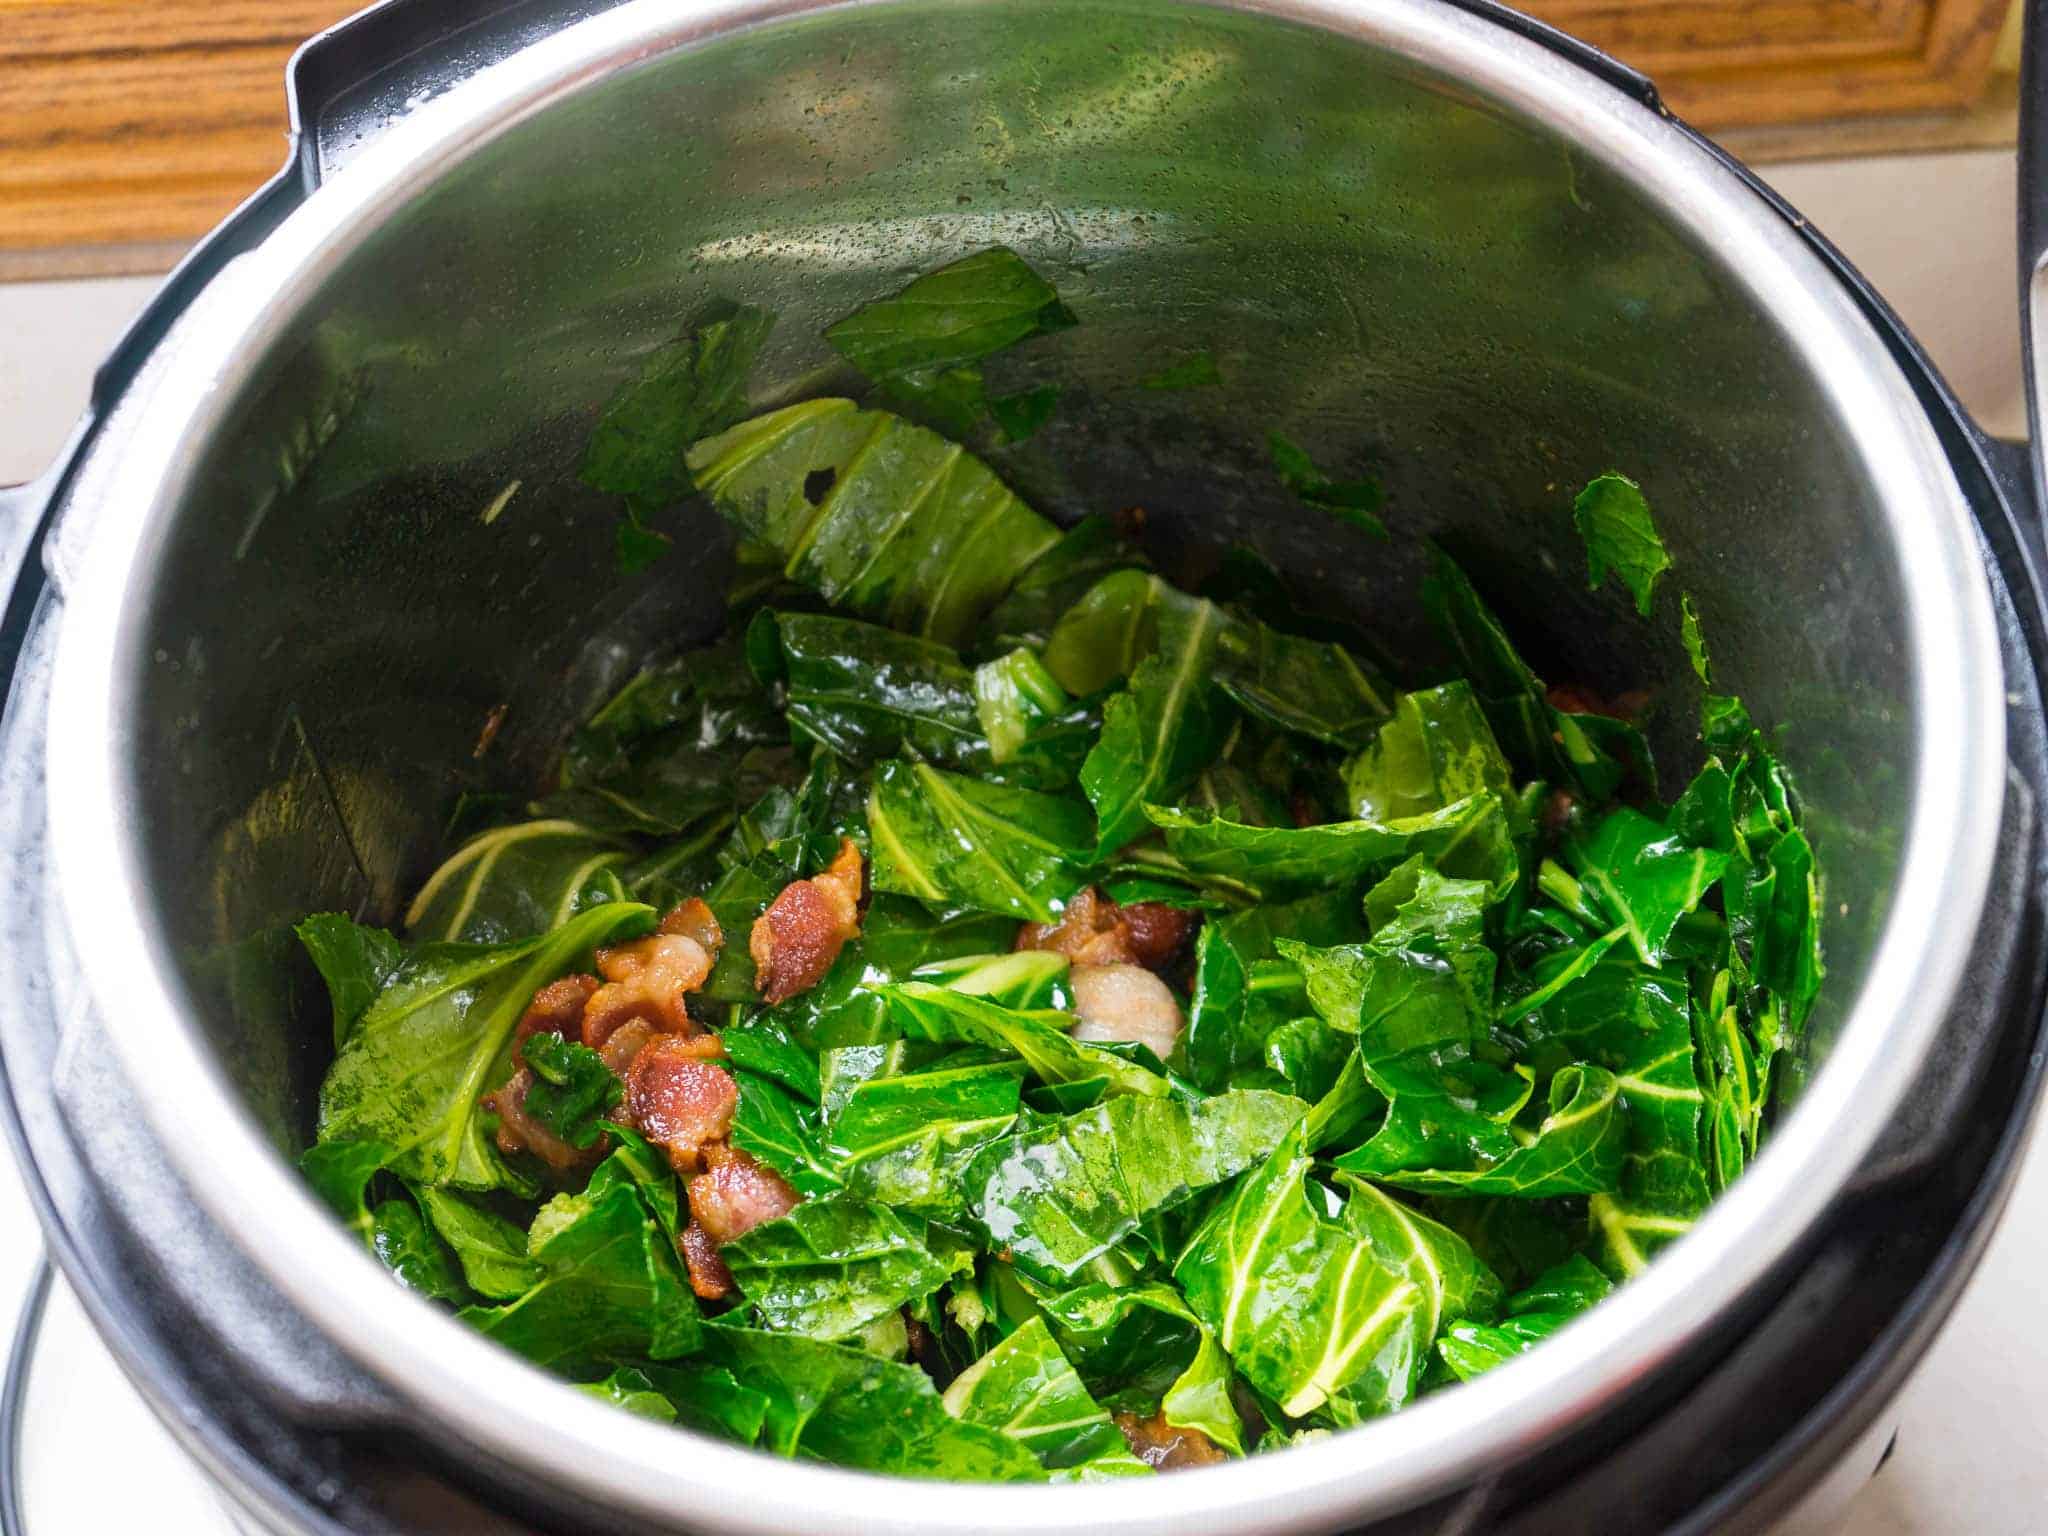 Wilted collard greens in an instant pot